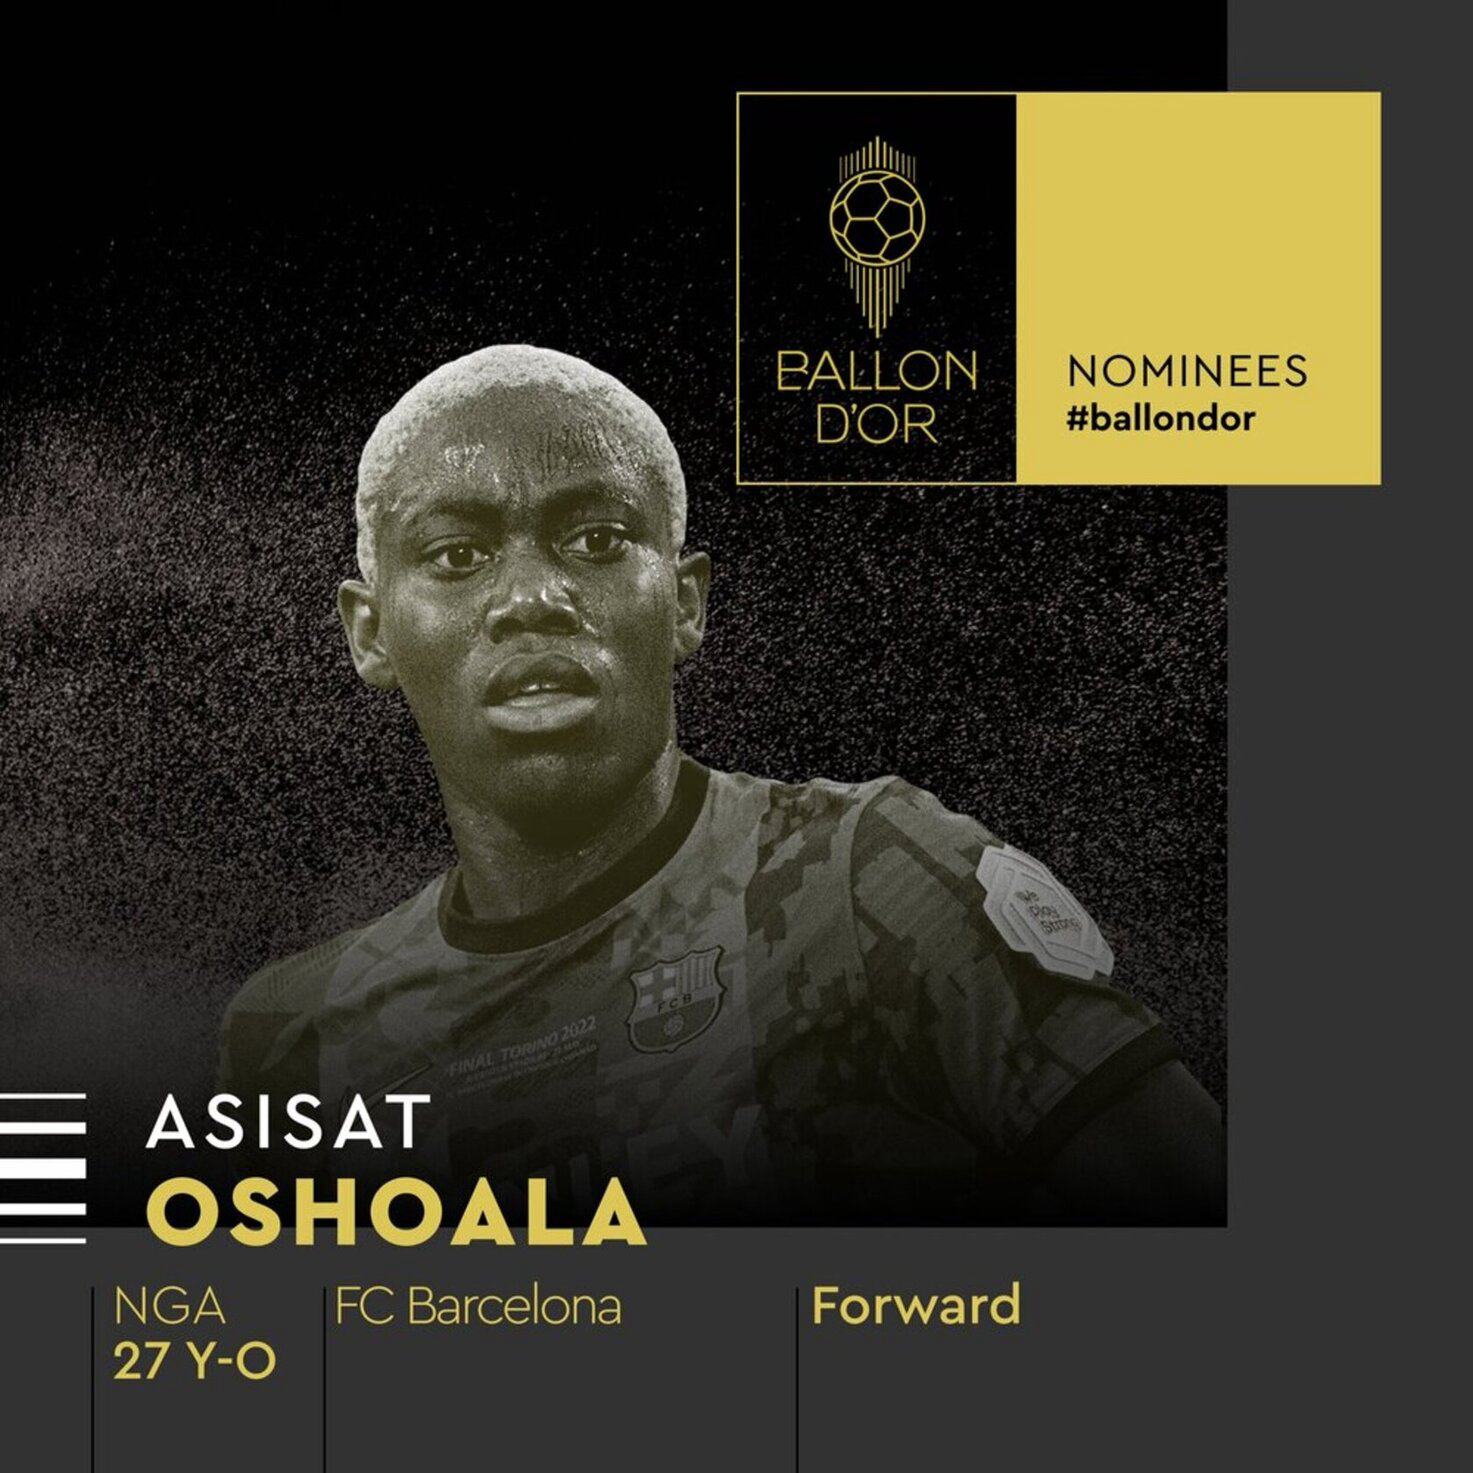 Asisat Oshoala Becomes First African Woman to Bag Ballon d'Or Nomination | The African Exponent.